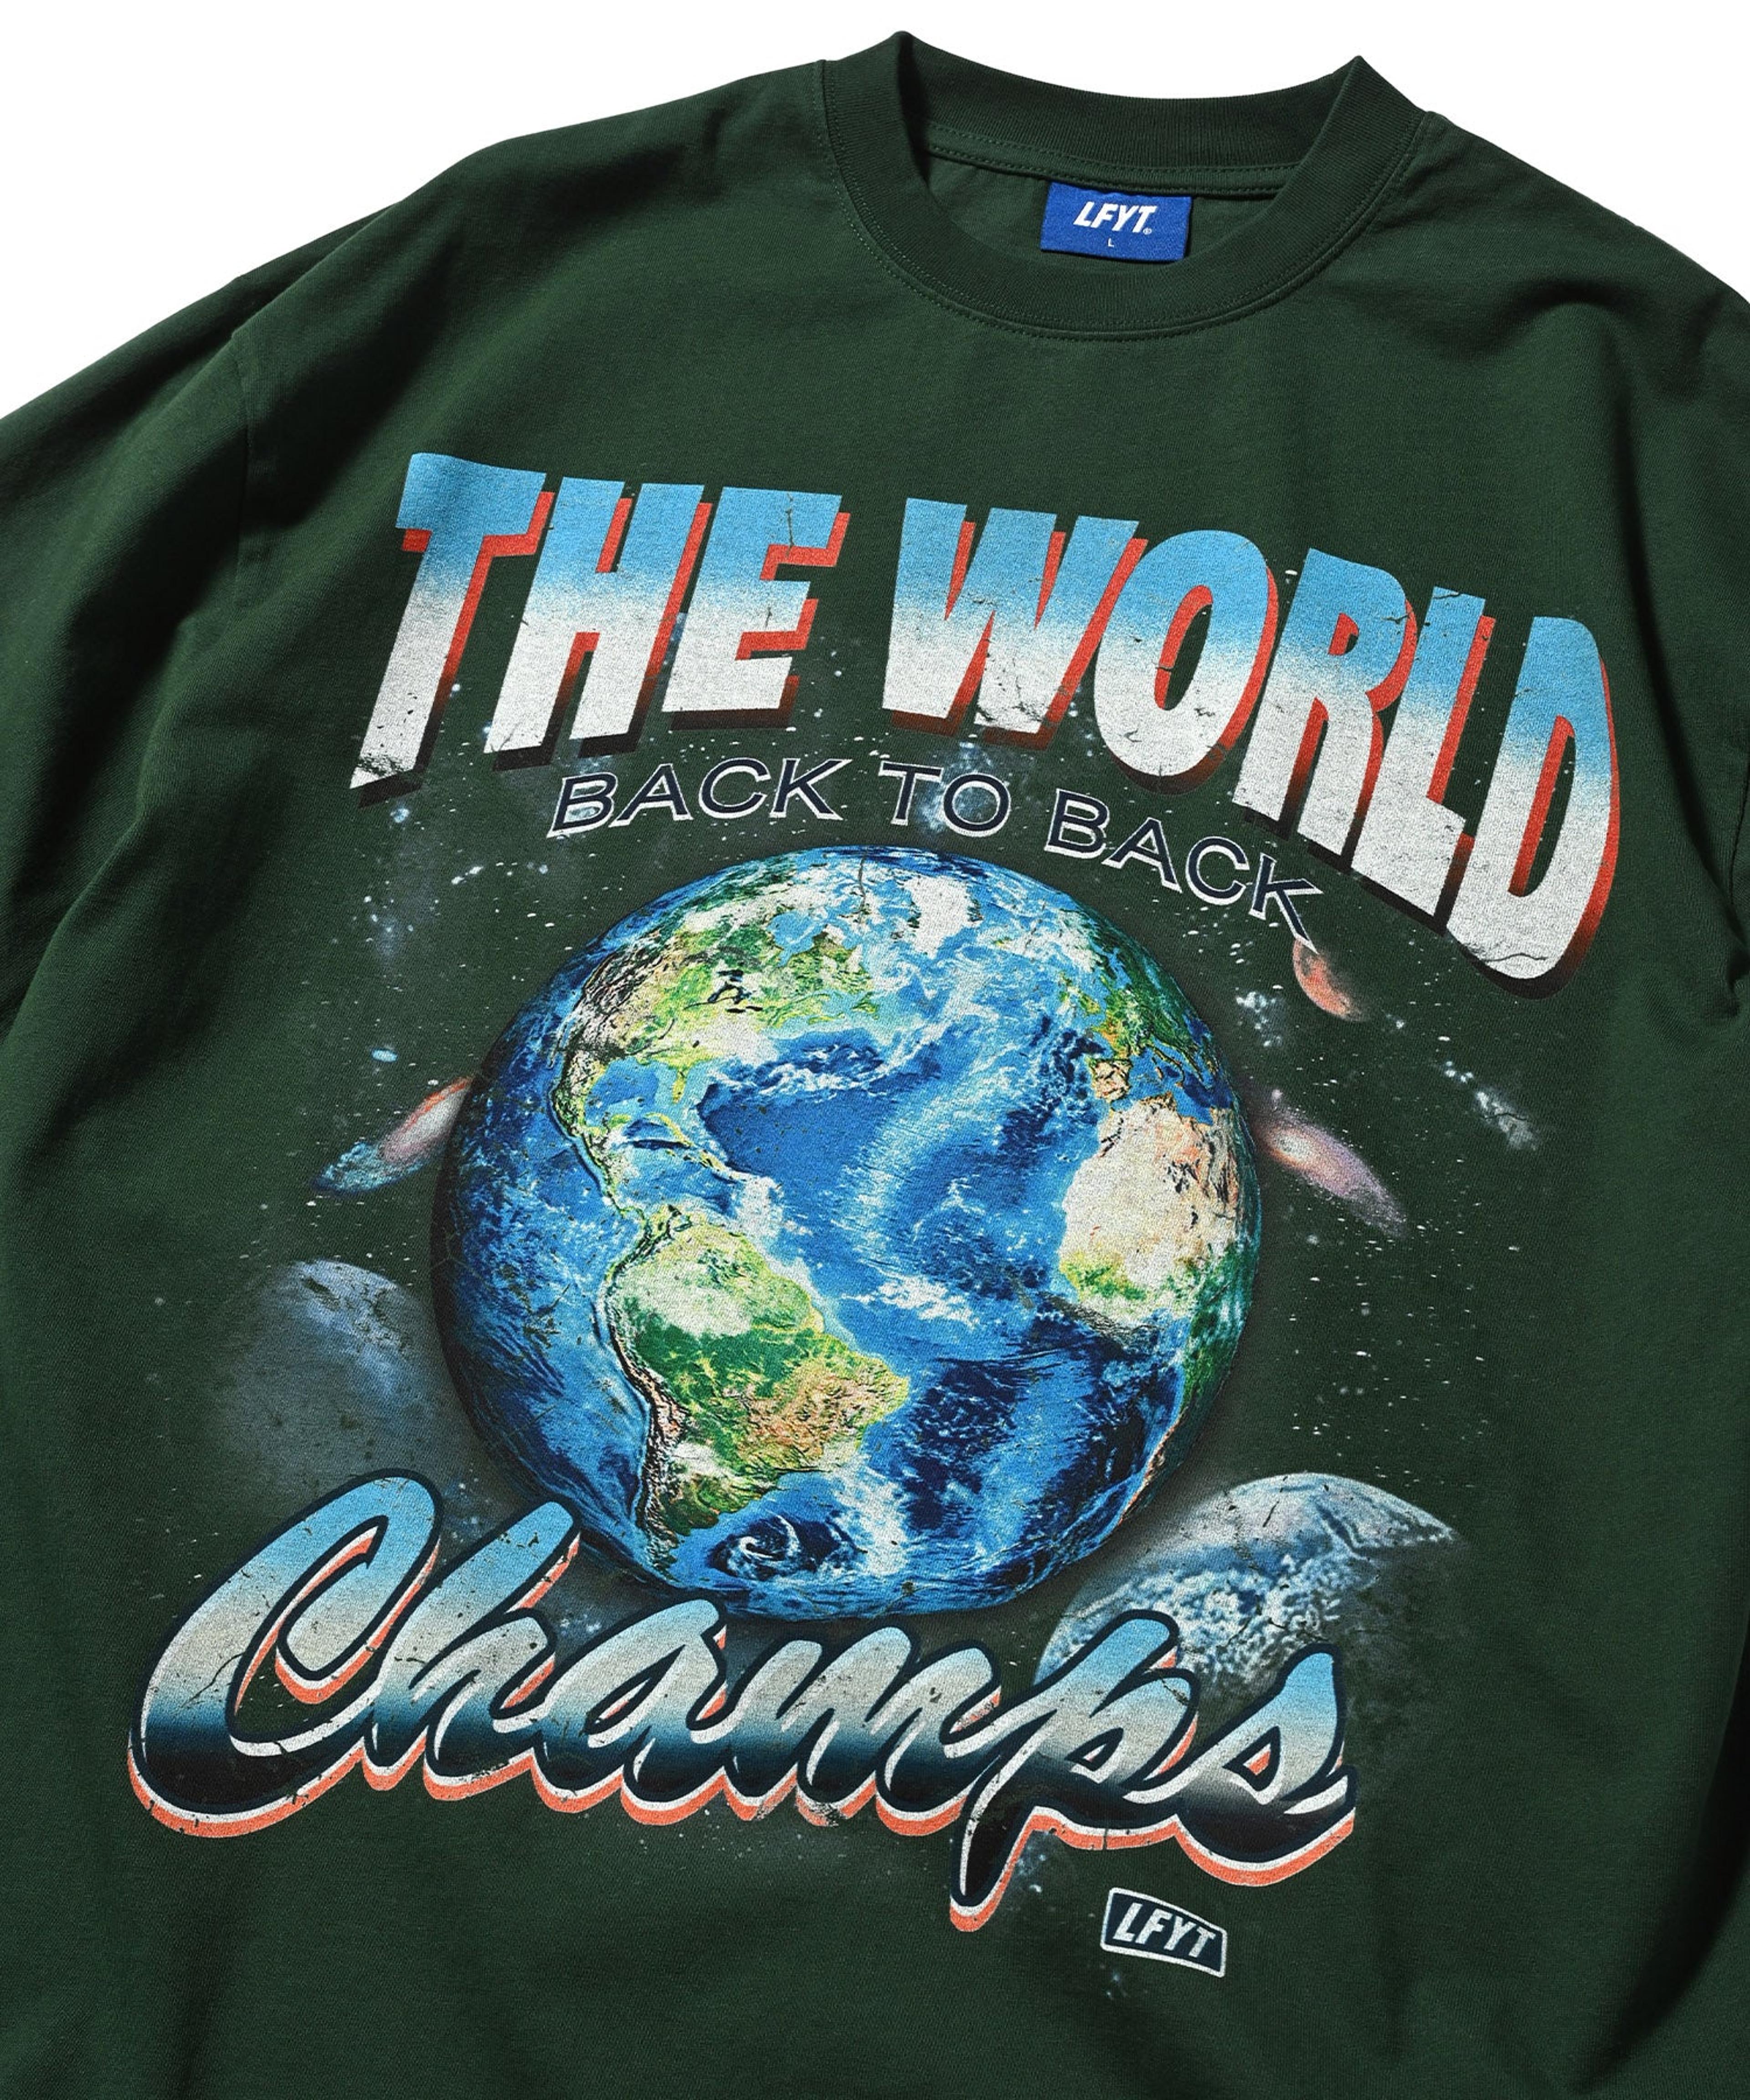 Alternate View 8 of LFYT - WORLD CHAMPS TEE TYPE-9 - VINTAGE EDITION LS240112